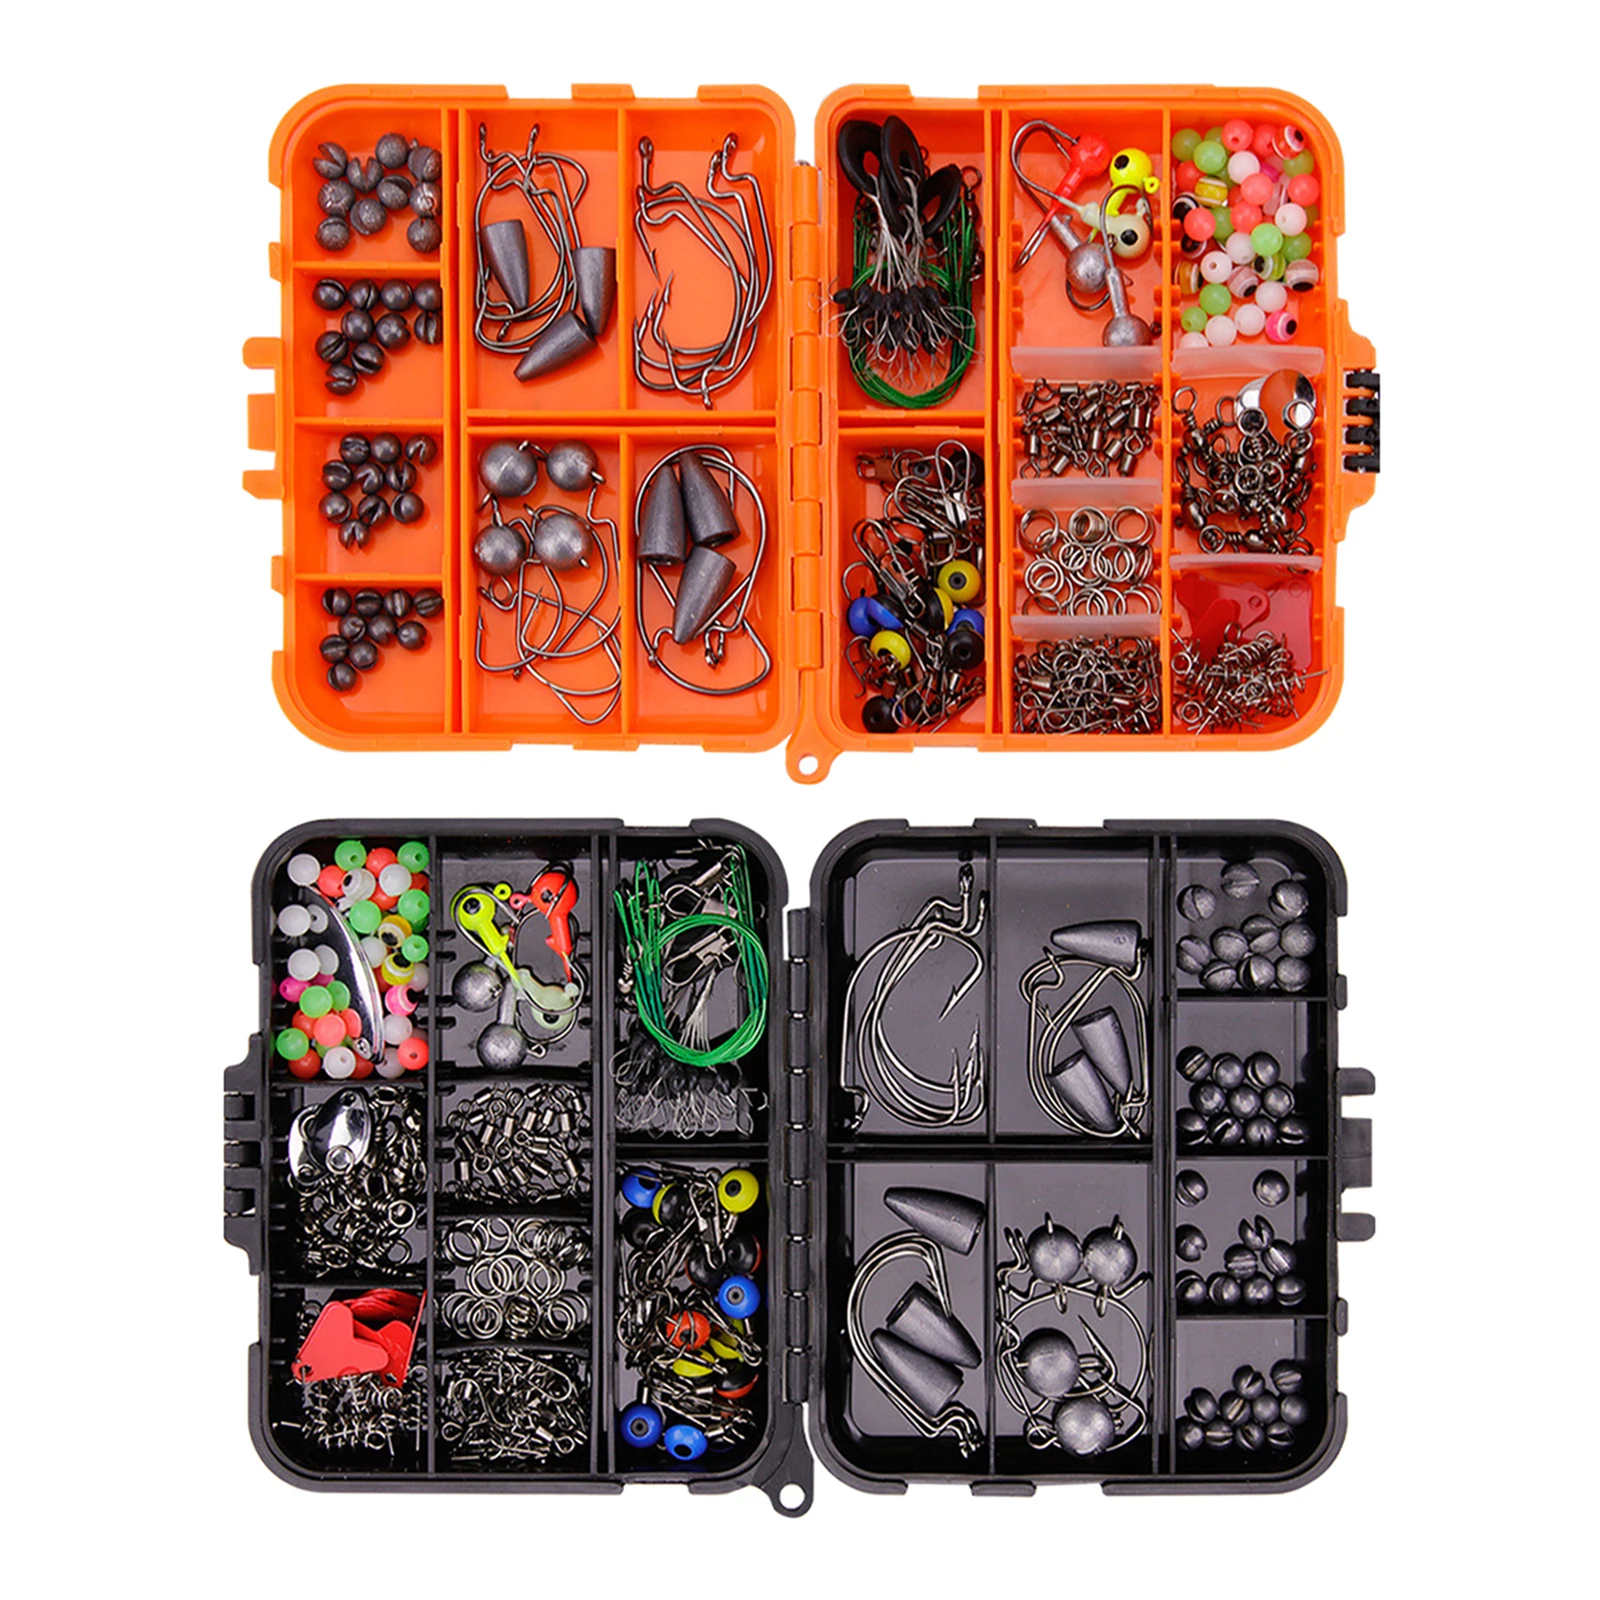 

257pcs/box Fishing Tackles Box Accessories Kit Set With Hooks Snap Sinker Weight For Carp Bait Lure Ice Winter Accessoires